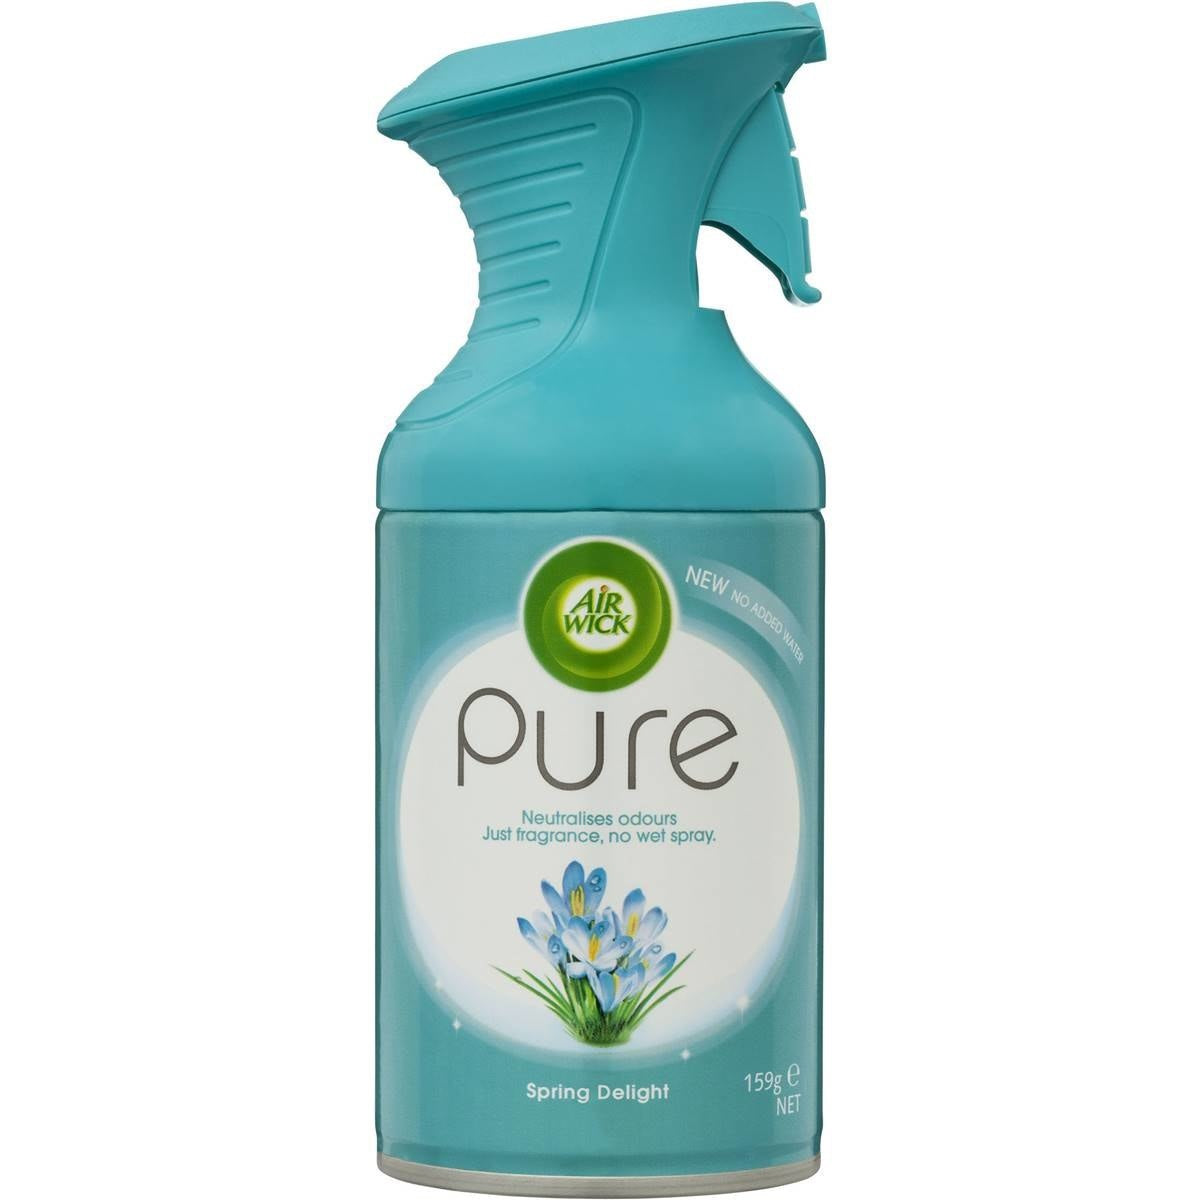 Air Wick Pure Air Freshener Spring Delight 159g